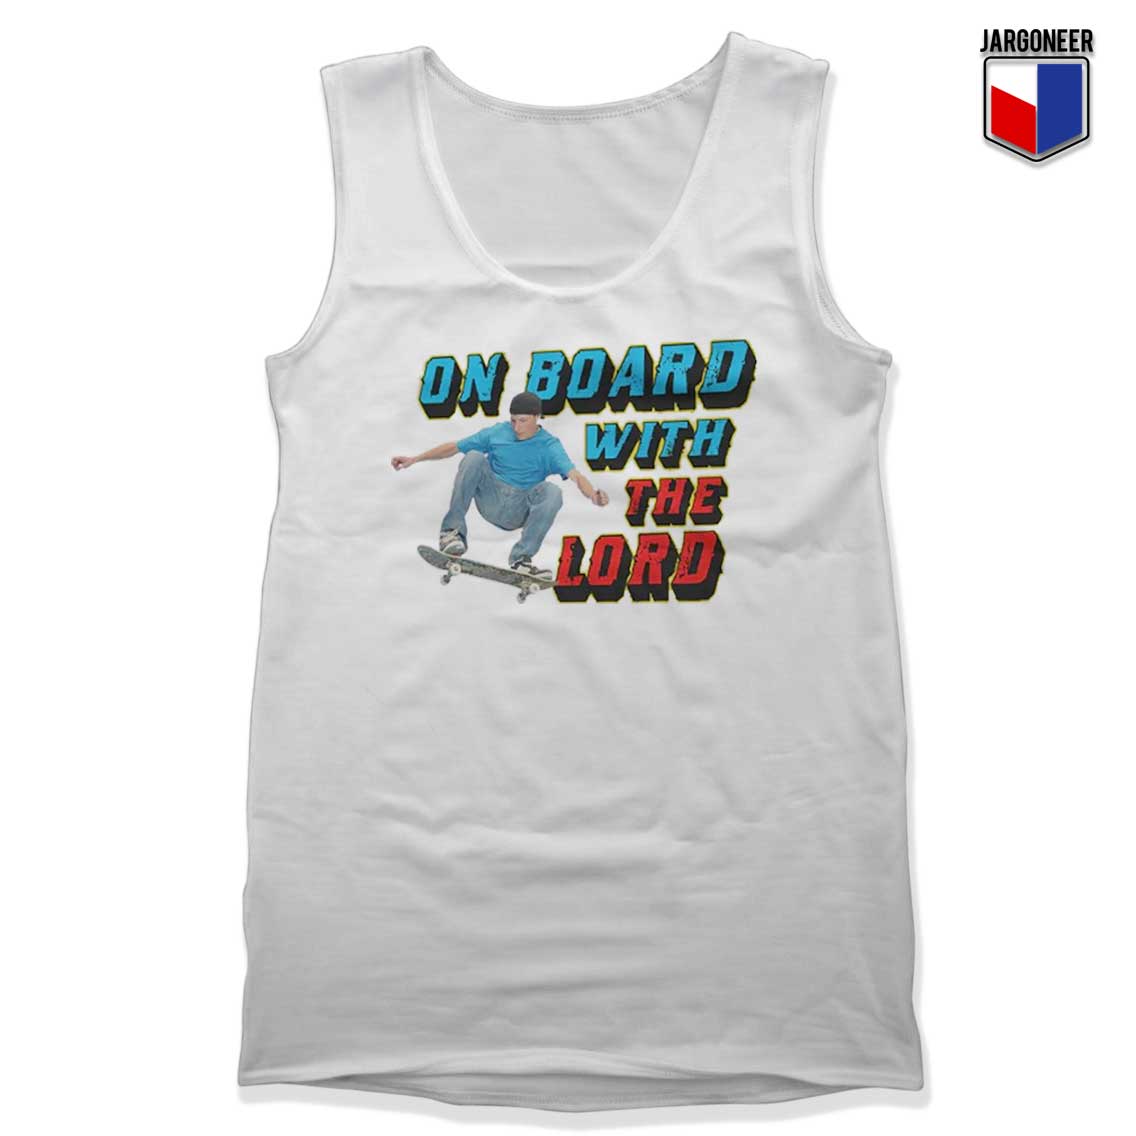 On Board With The Lord White Tank Top - Shop Unique Graphic Cool Shirt Designs